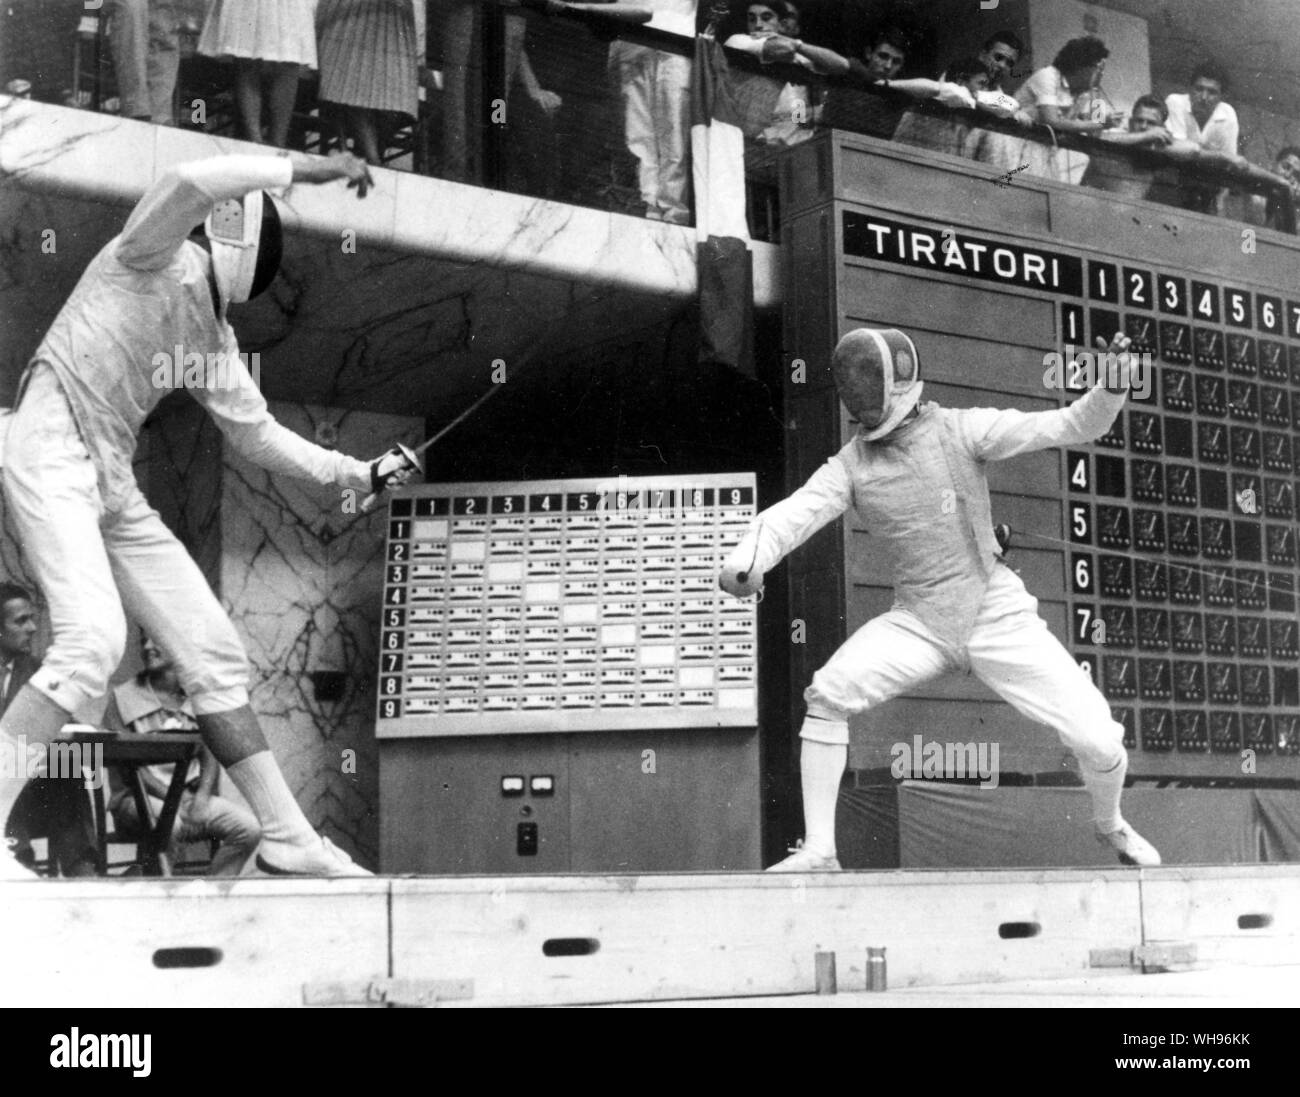 Italy, Rome, Olympic Games, 1960: Viktor Zhdanovich (USSR) is shown in action versus Parulski of Poland in the semi-final of the foils fencing contest. He went on to win the gold medal.. Stock Photo